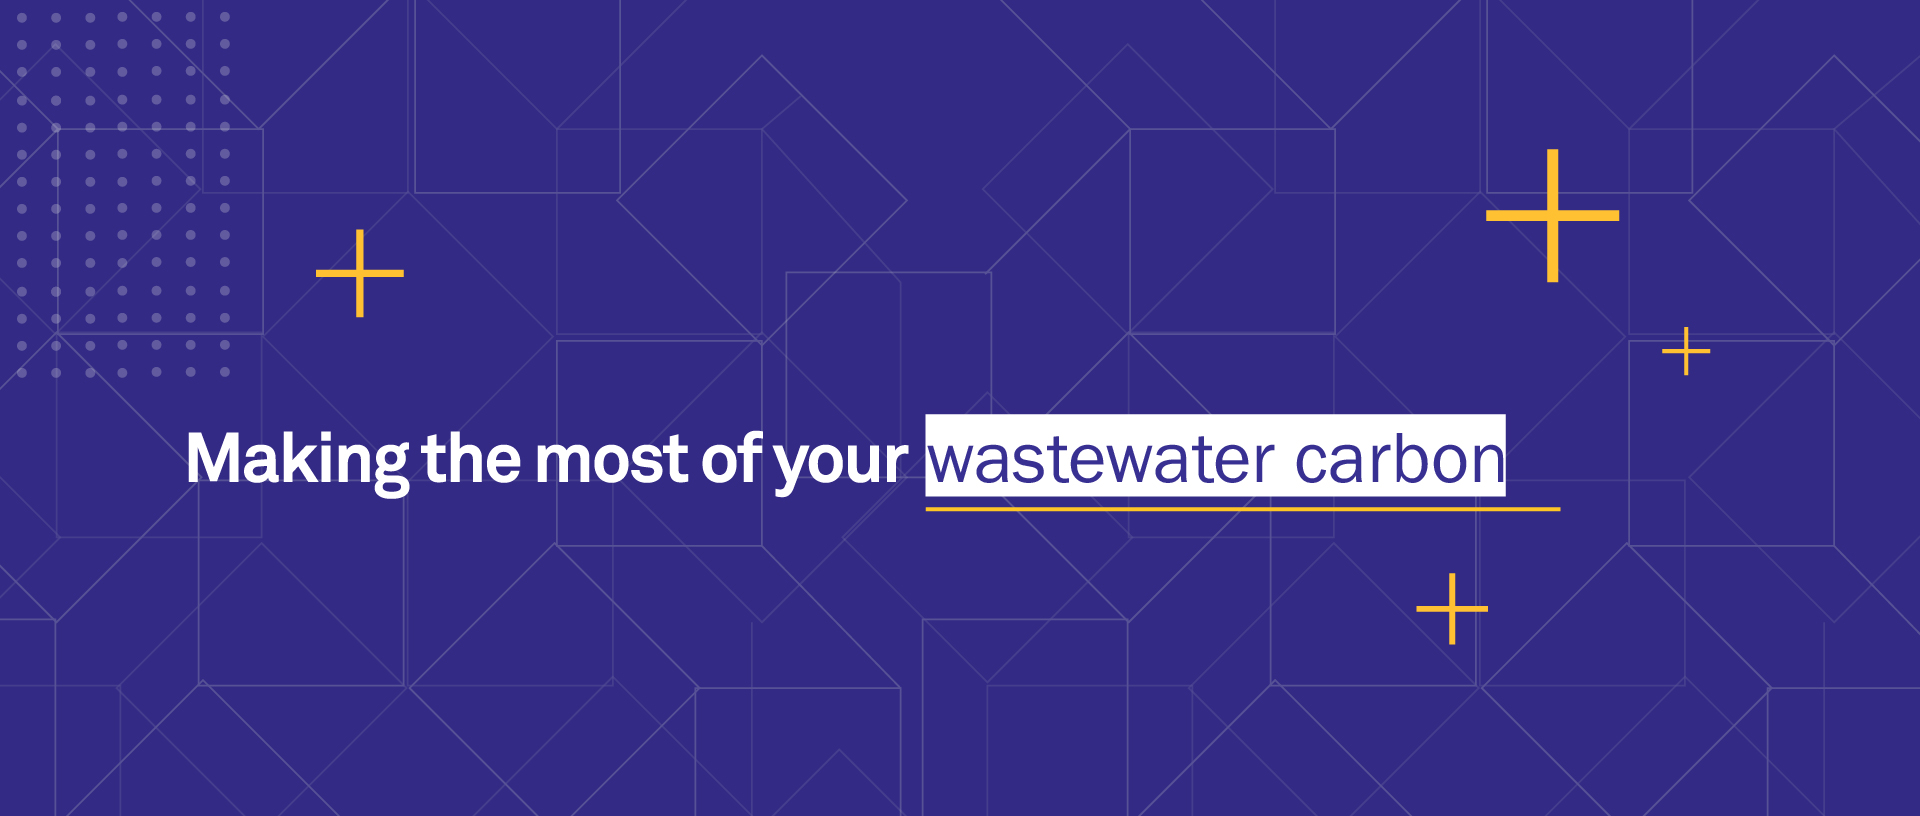 BC:Opta hero image says: "Making the most of your wastewater carbon"